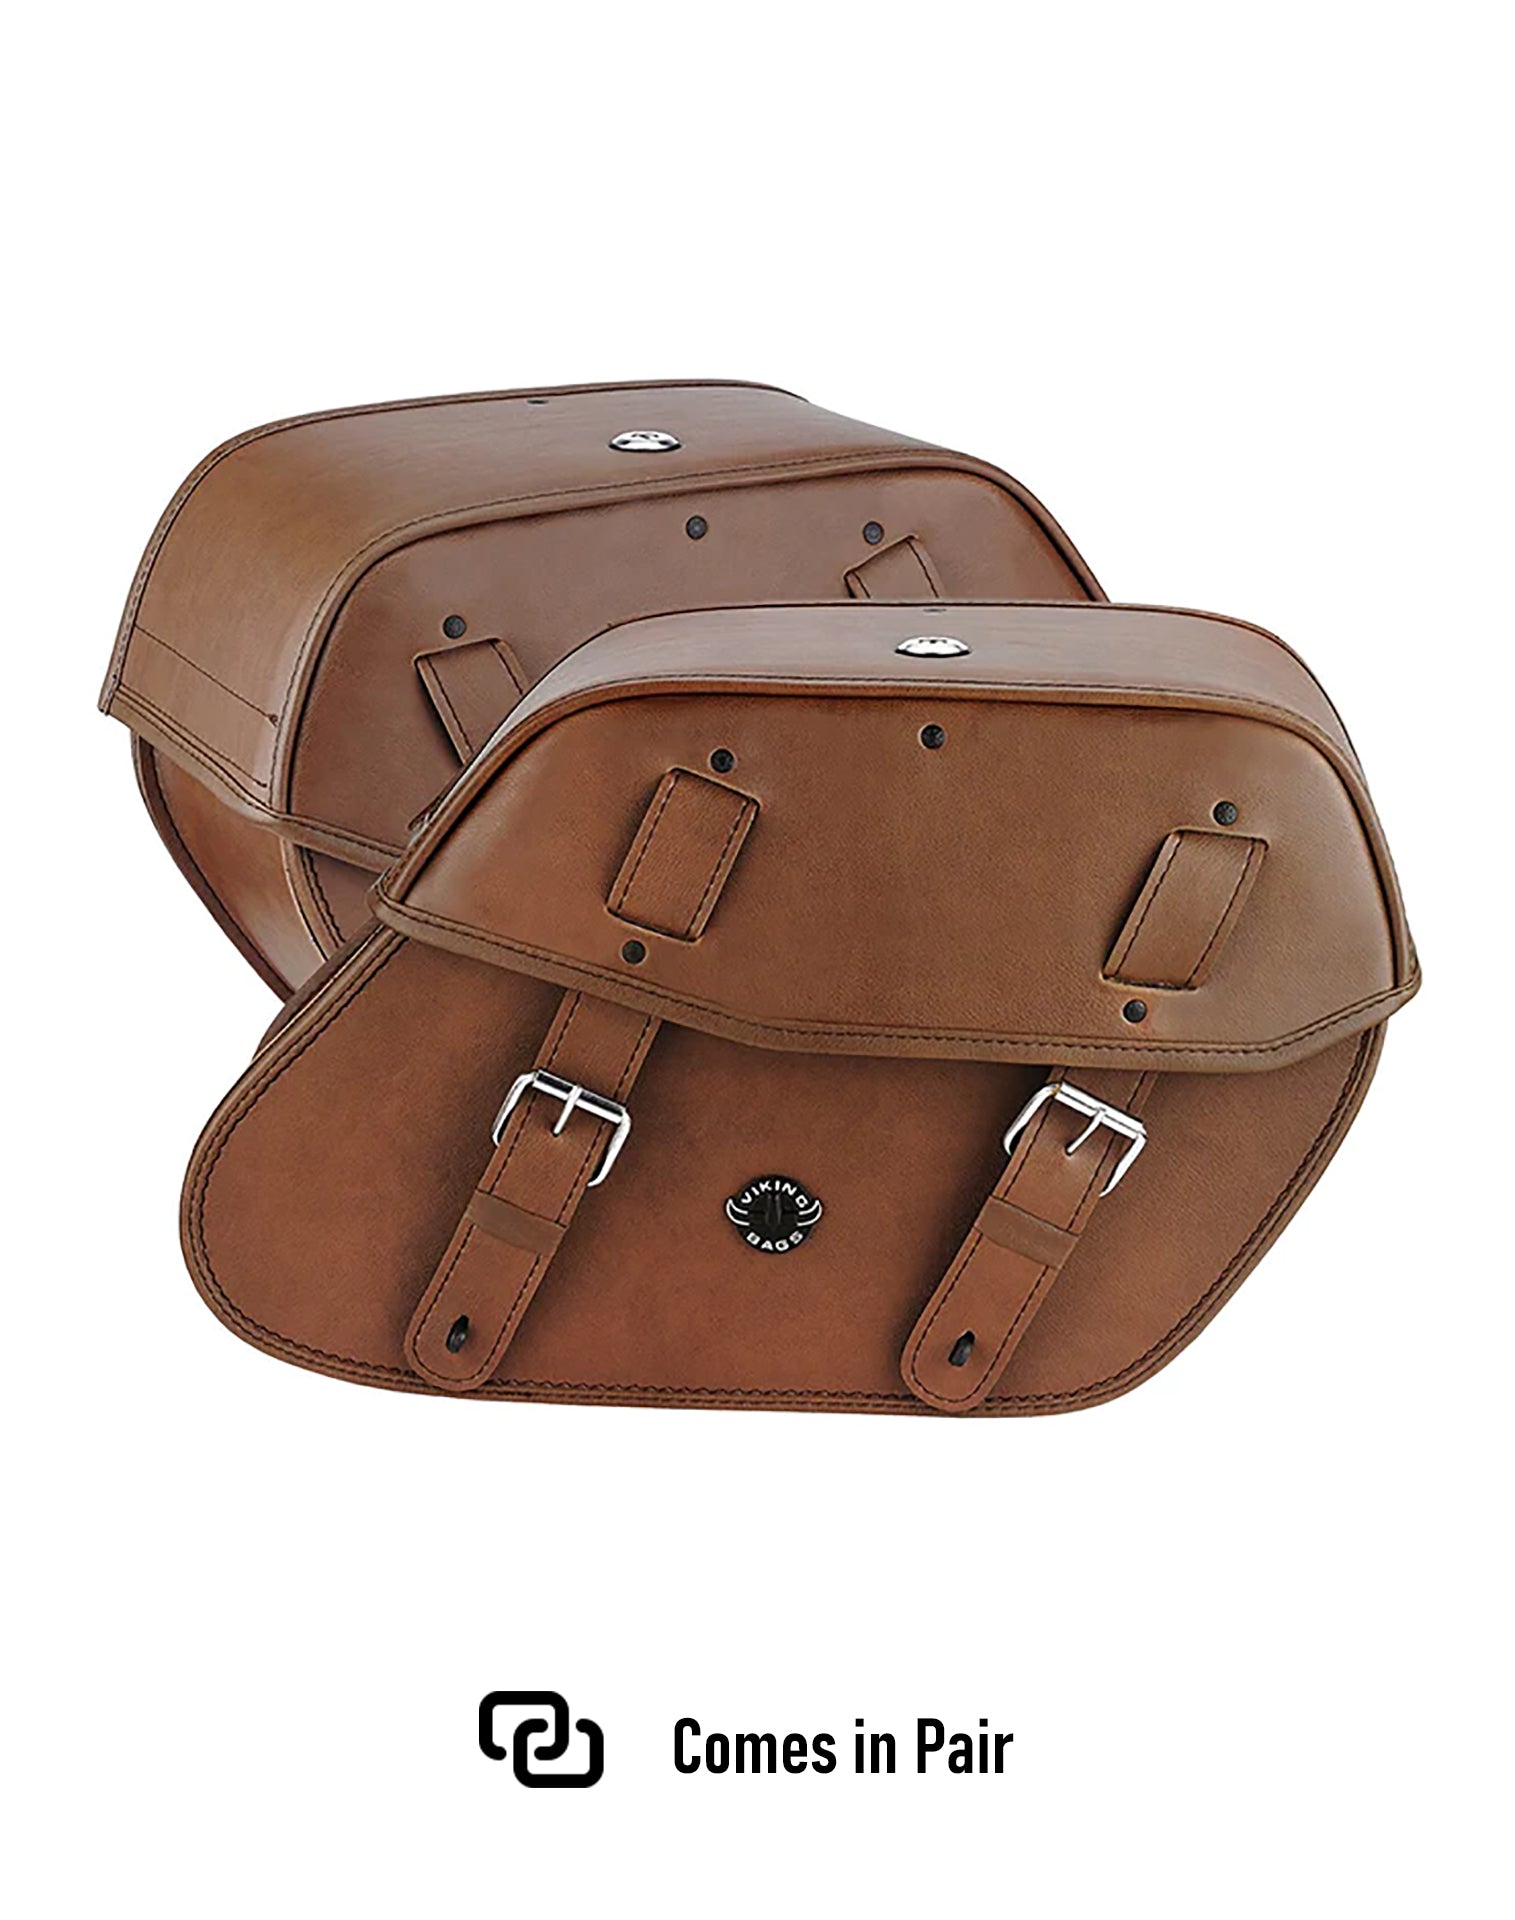 Viking Odin Brown Large Leather Motorcycle Saddlebags For Harley Softail Fatboy Flstf I Weather Resistant Bags Comes in Pair